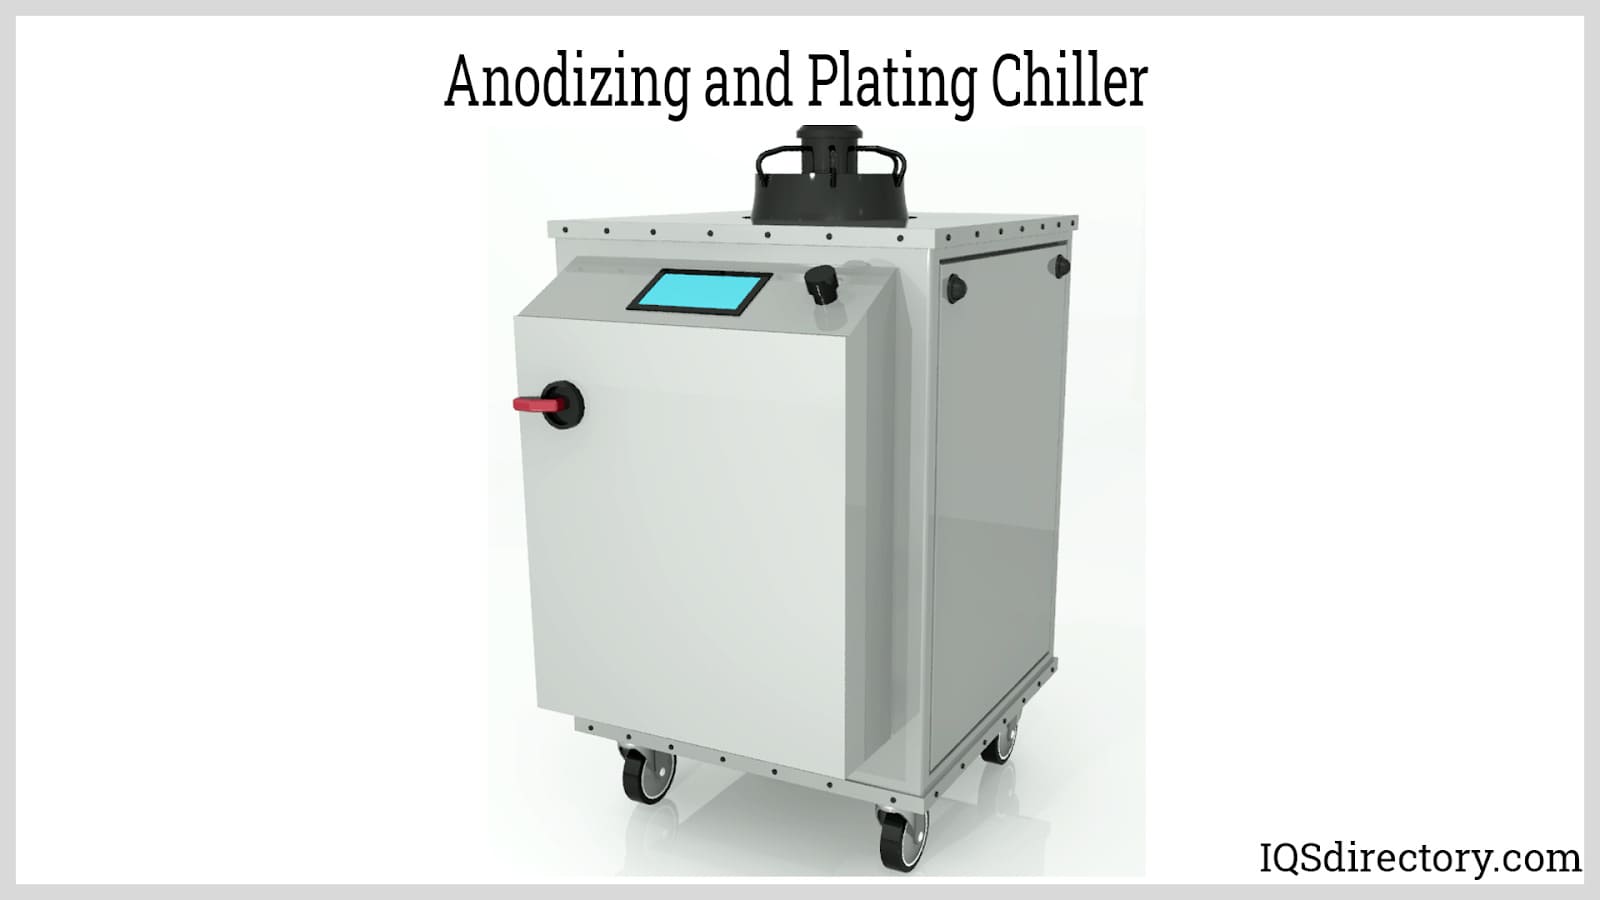 Anodizing and Plating Chiller